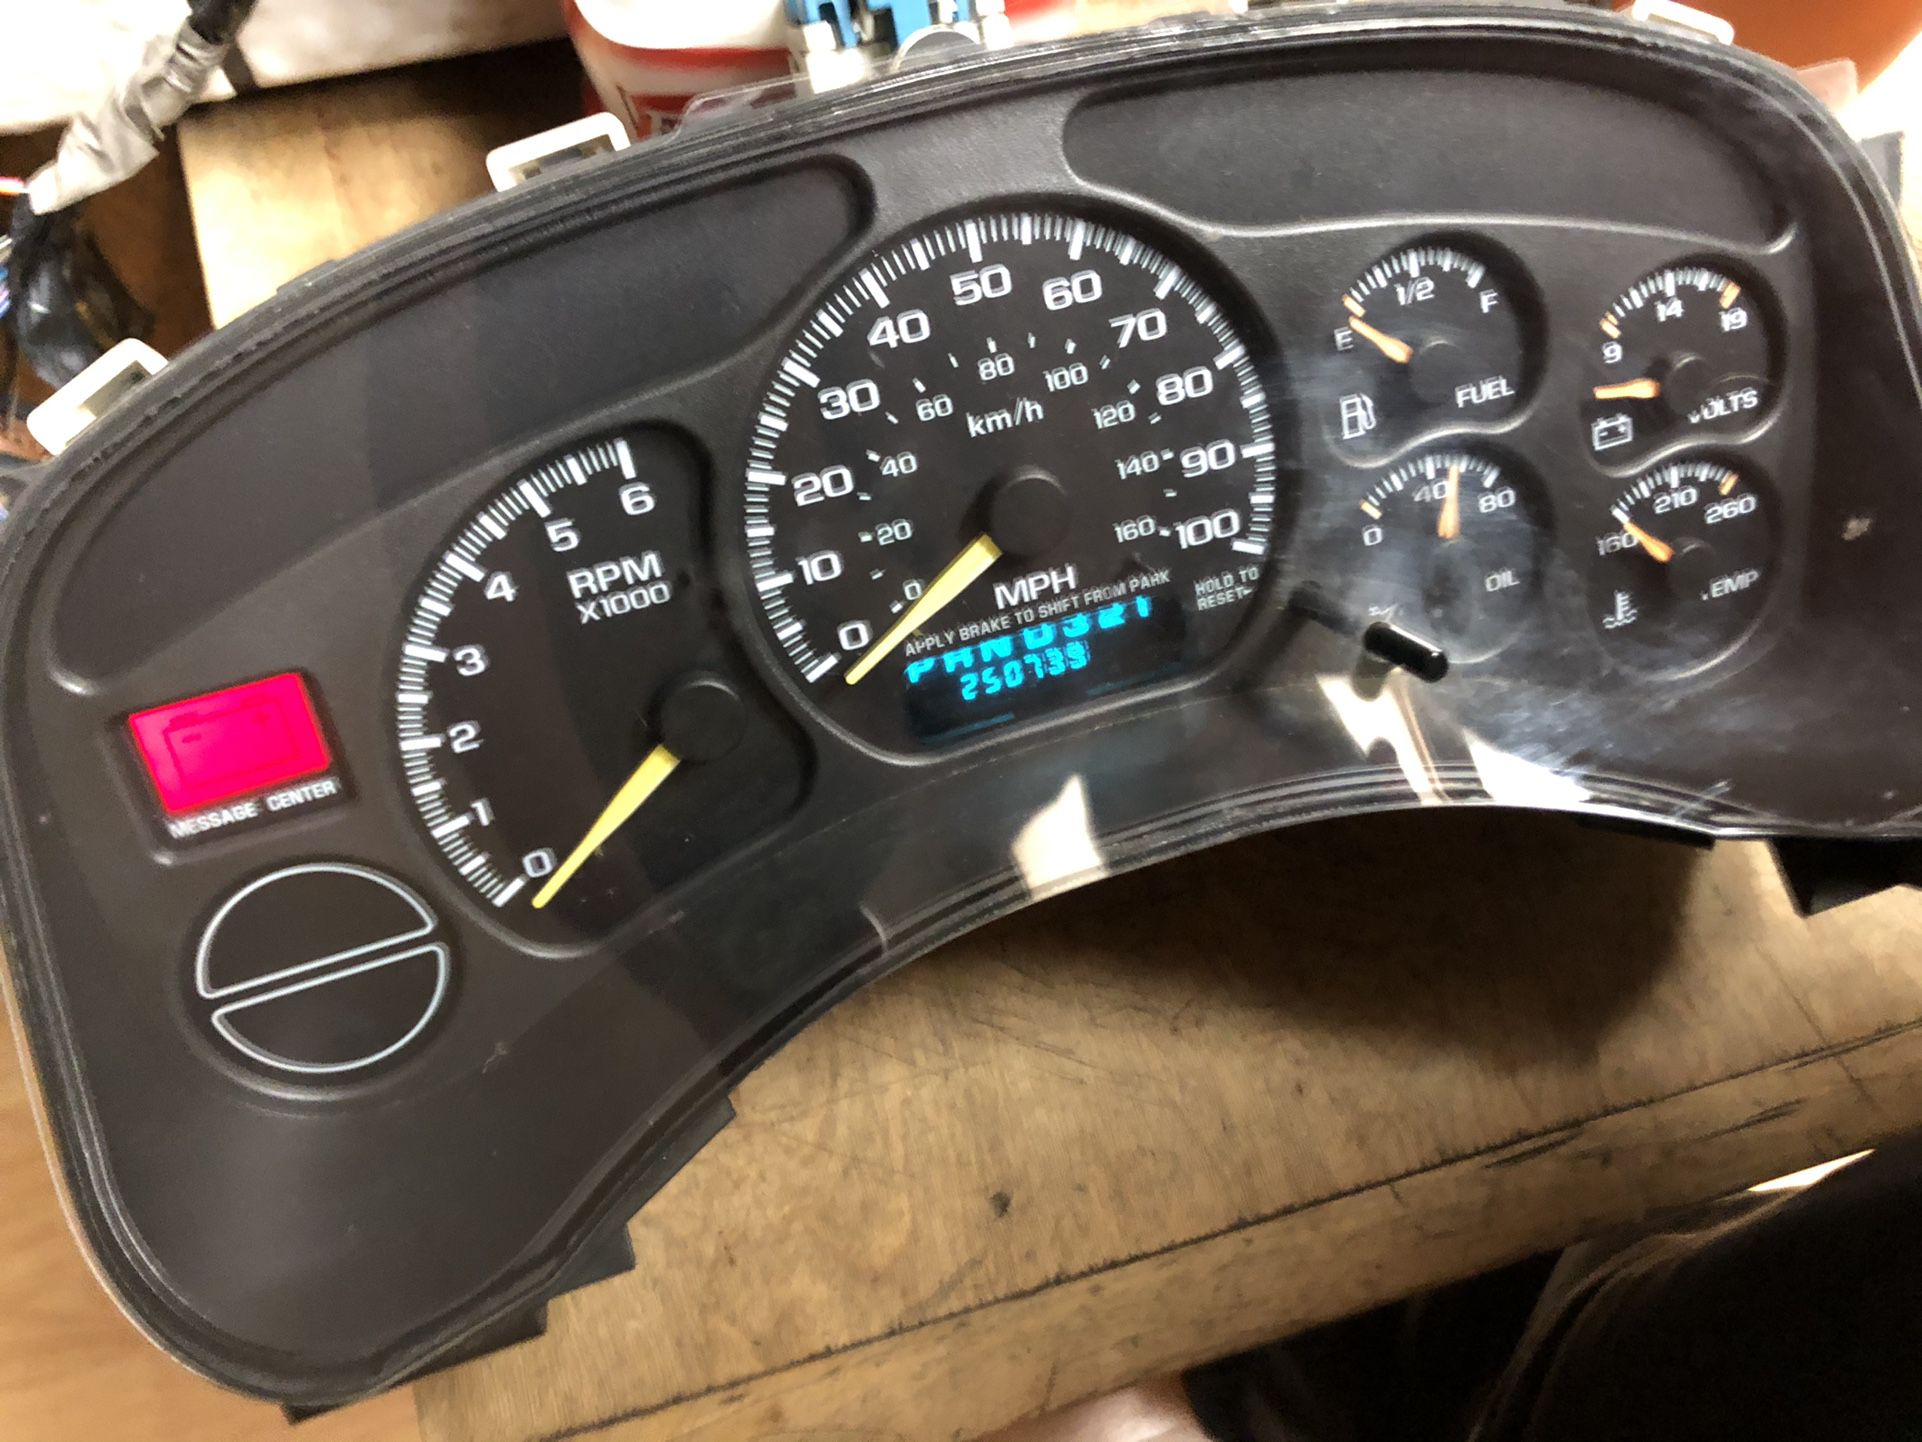 CHEVY TRUCK 2001 GAUGE CLUSTER See Pictures For Other Parts